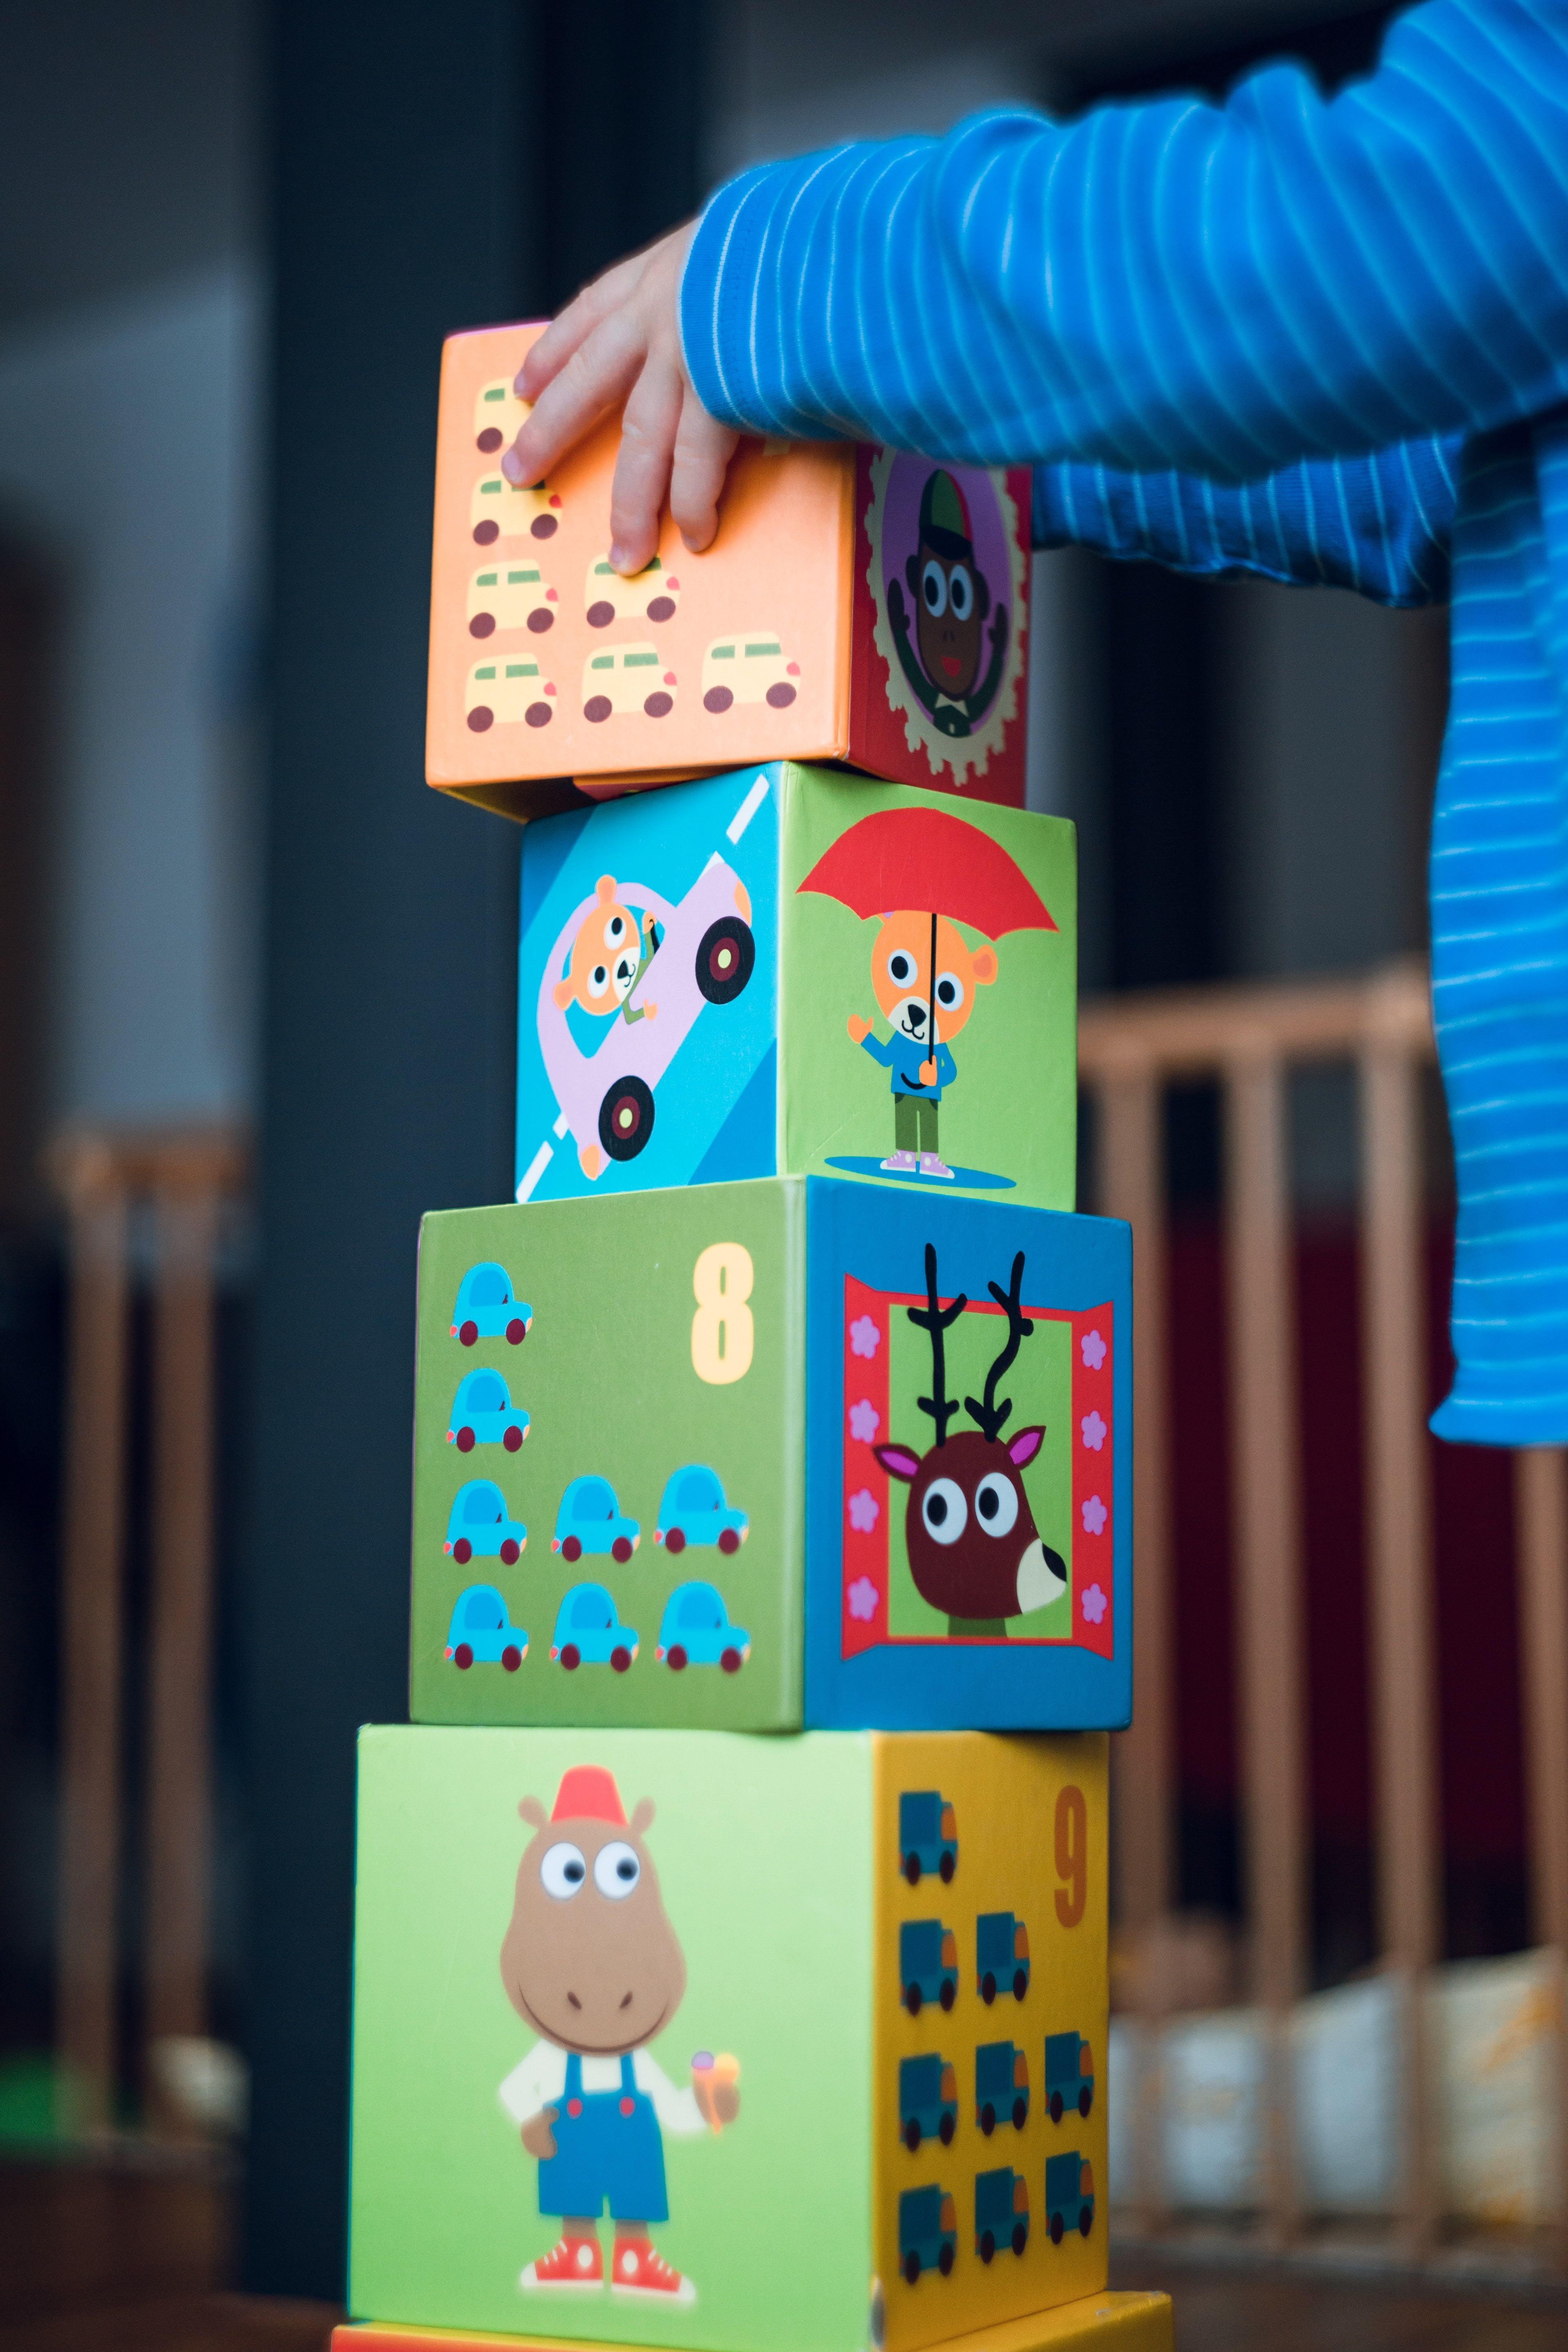 Small child stacks fourth block in tower of blocks.